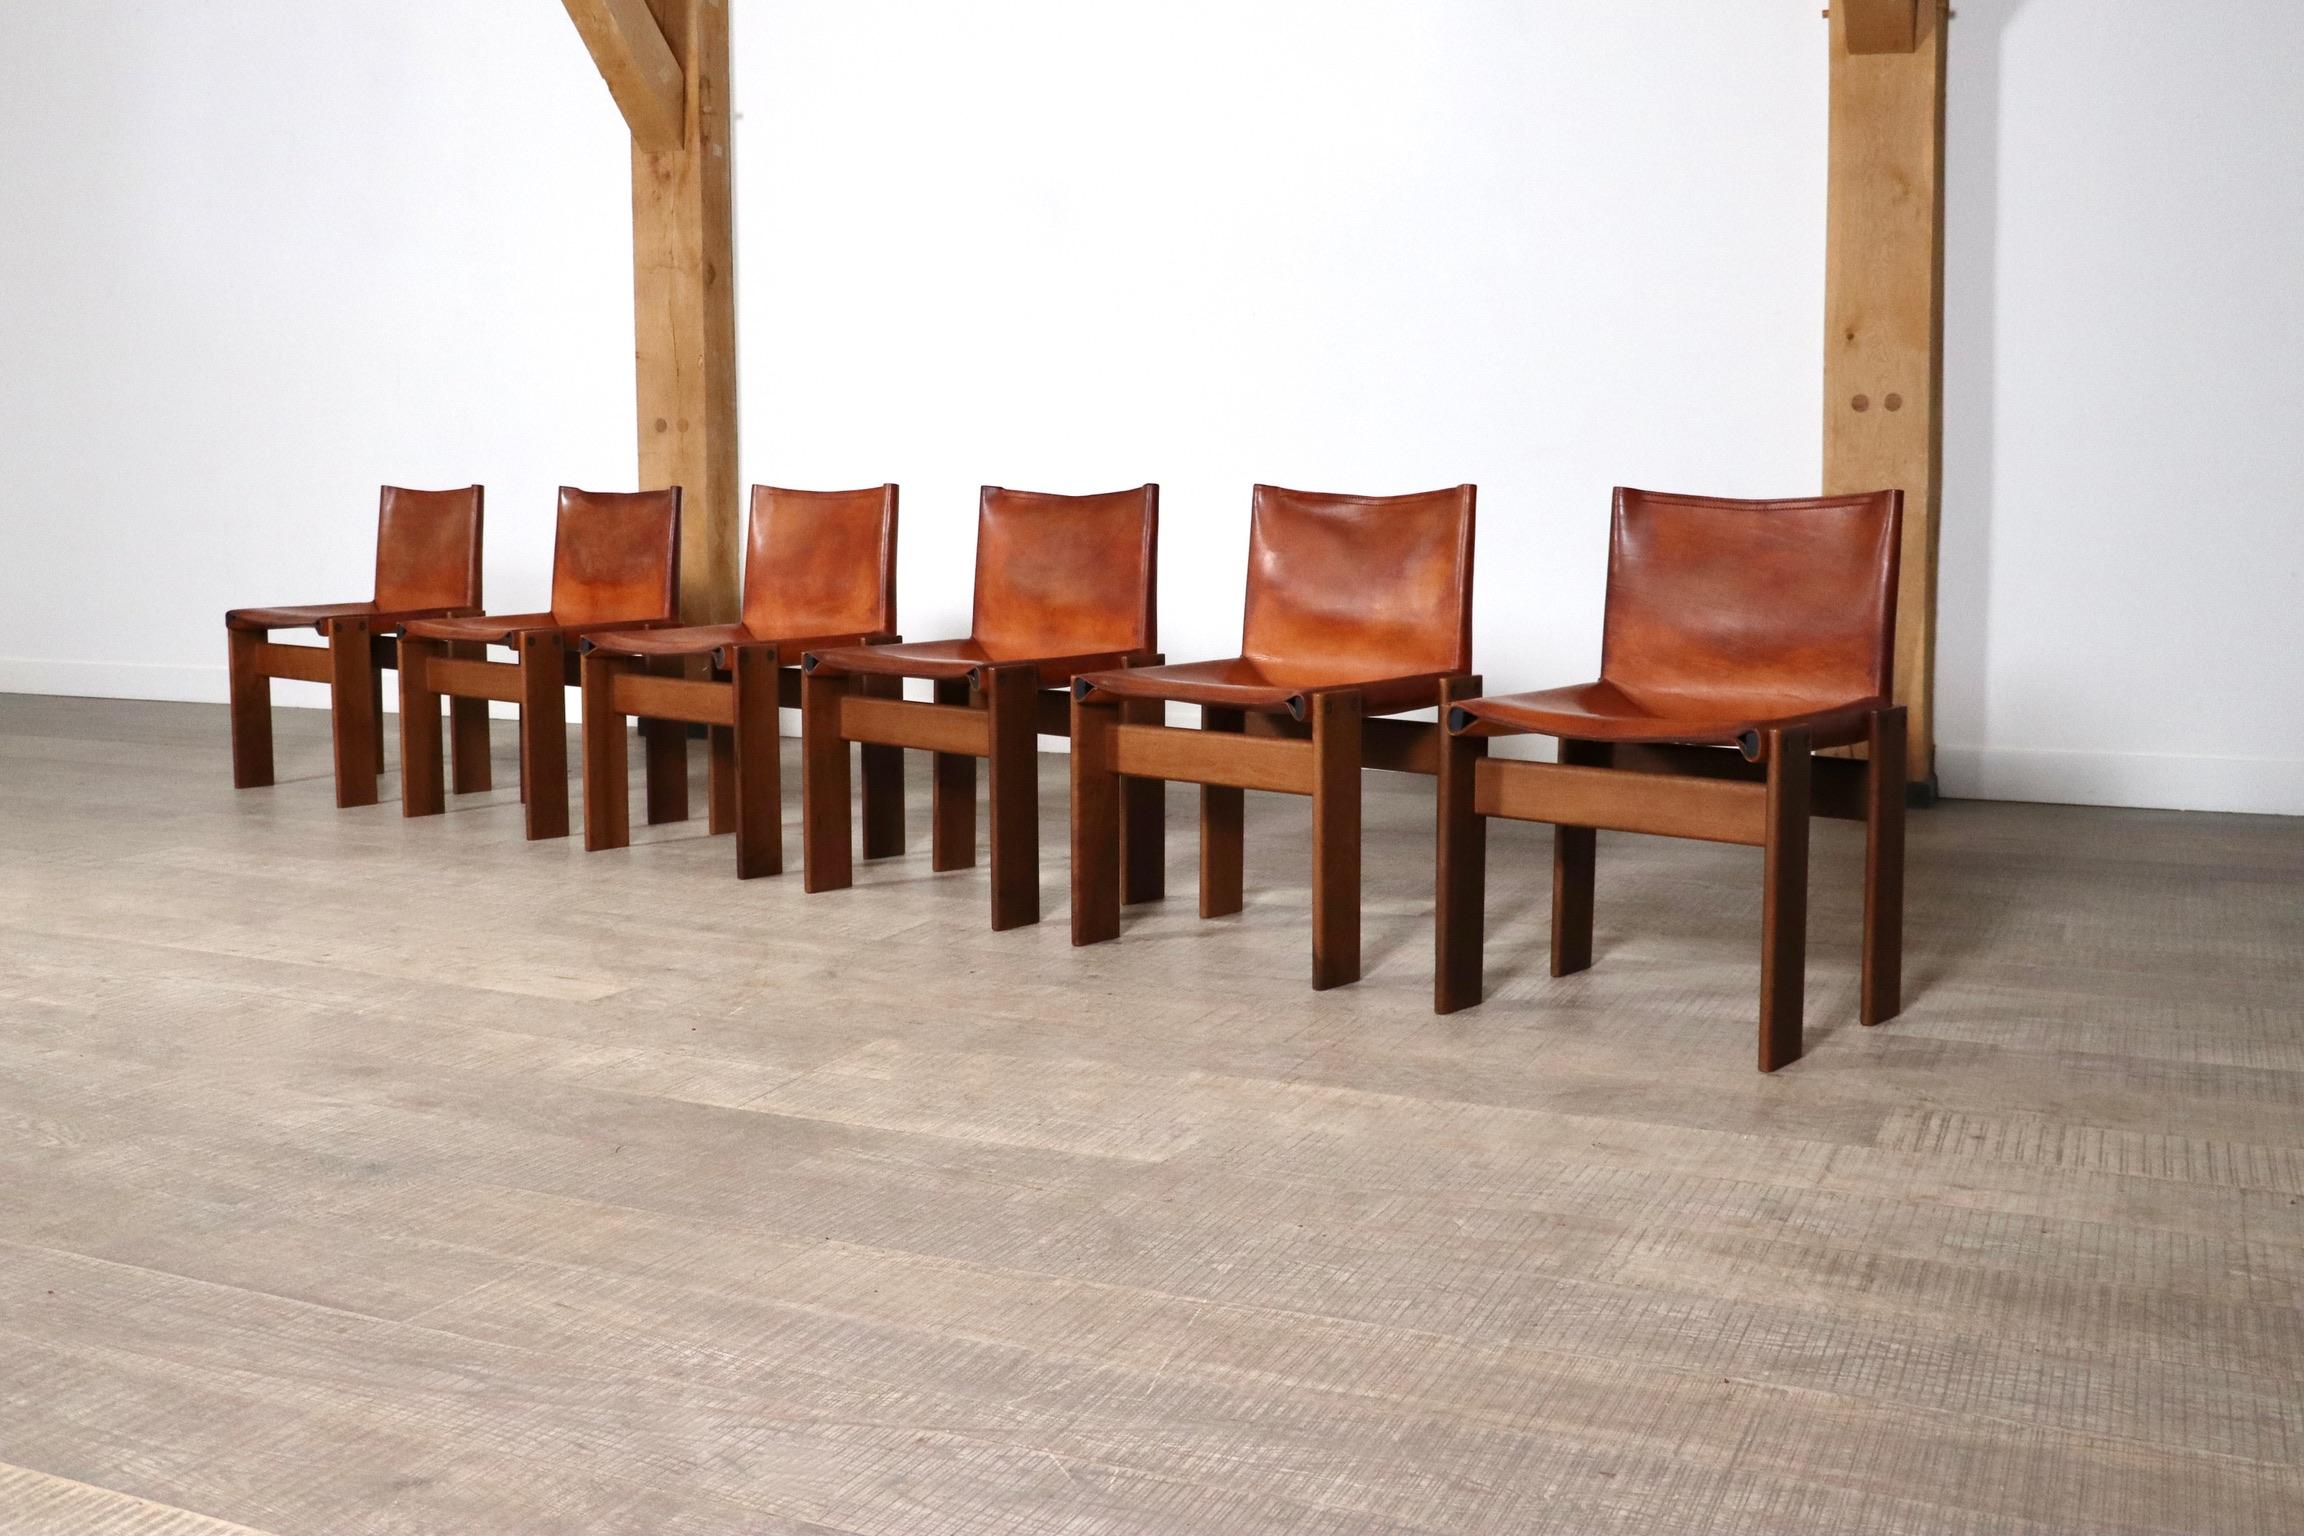 Fantastic set of 6 ‘Monk’ chairs designed by Afra and Tobia Scarpa for Molteni, Italy 1974. This design features a solid walnut wooden frame with nicely patinated cognac leather seating. The sober design, after its name “Monk” is complemented with